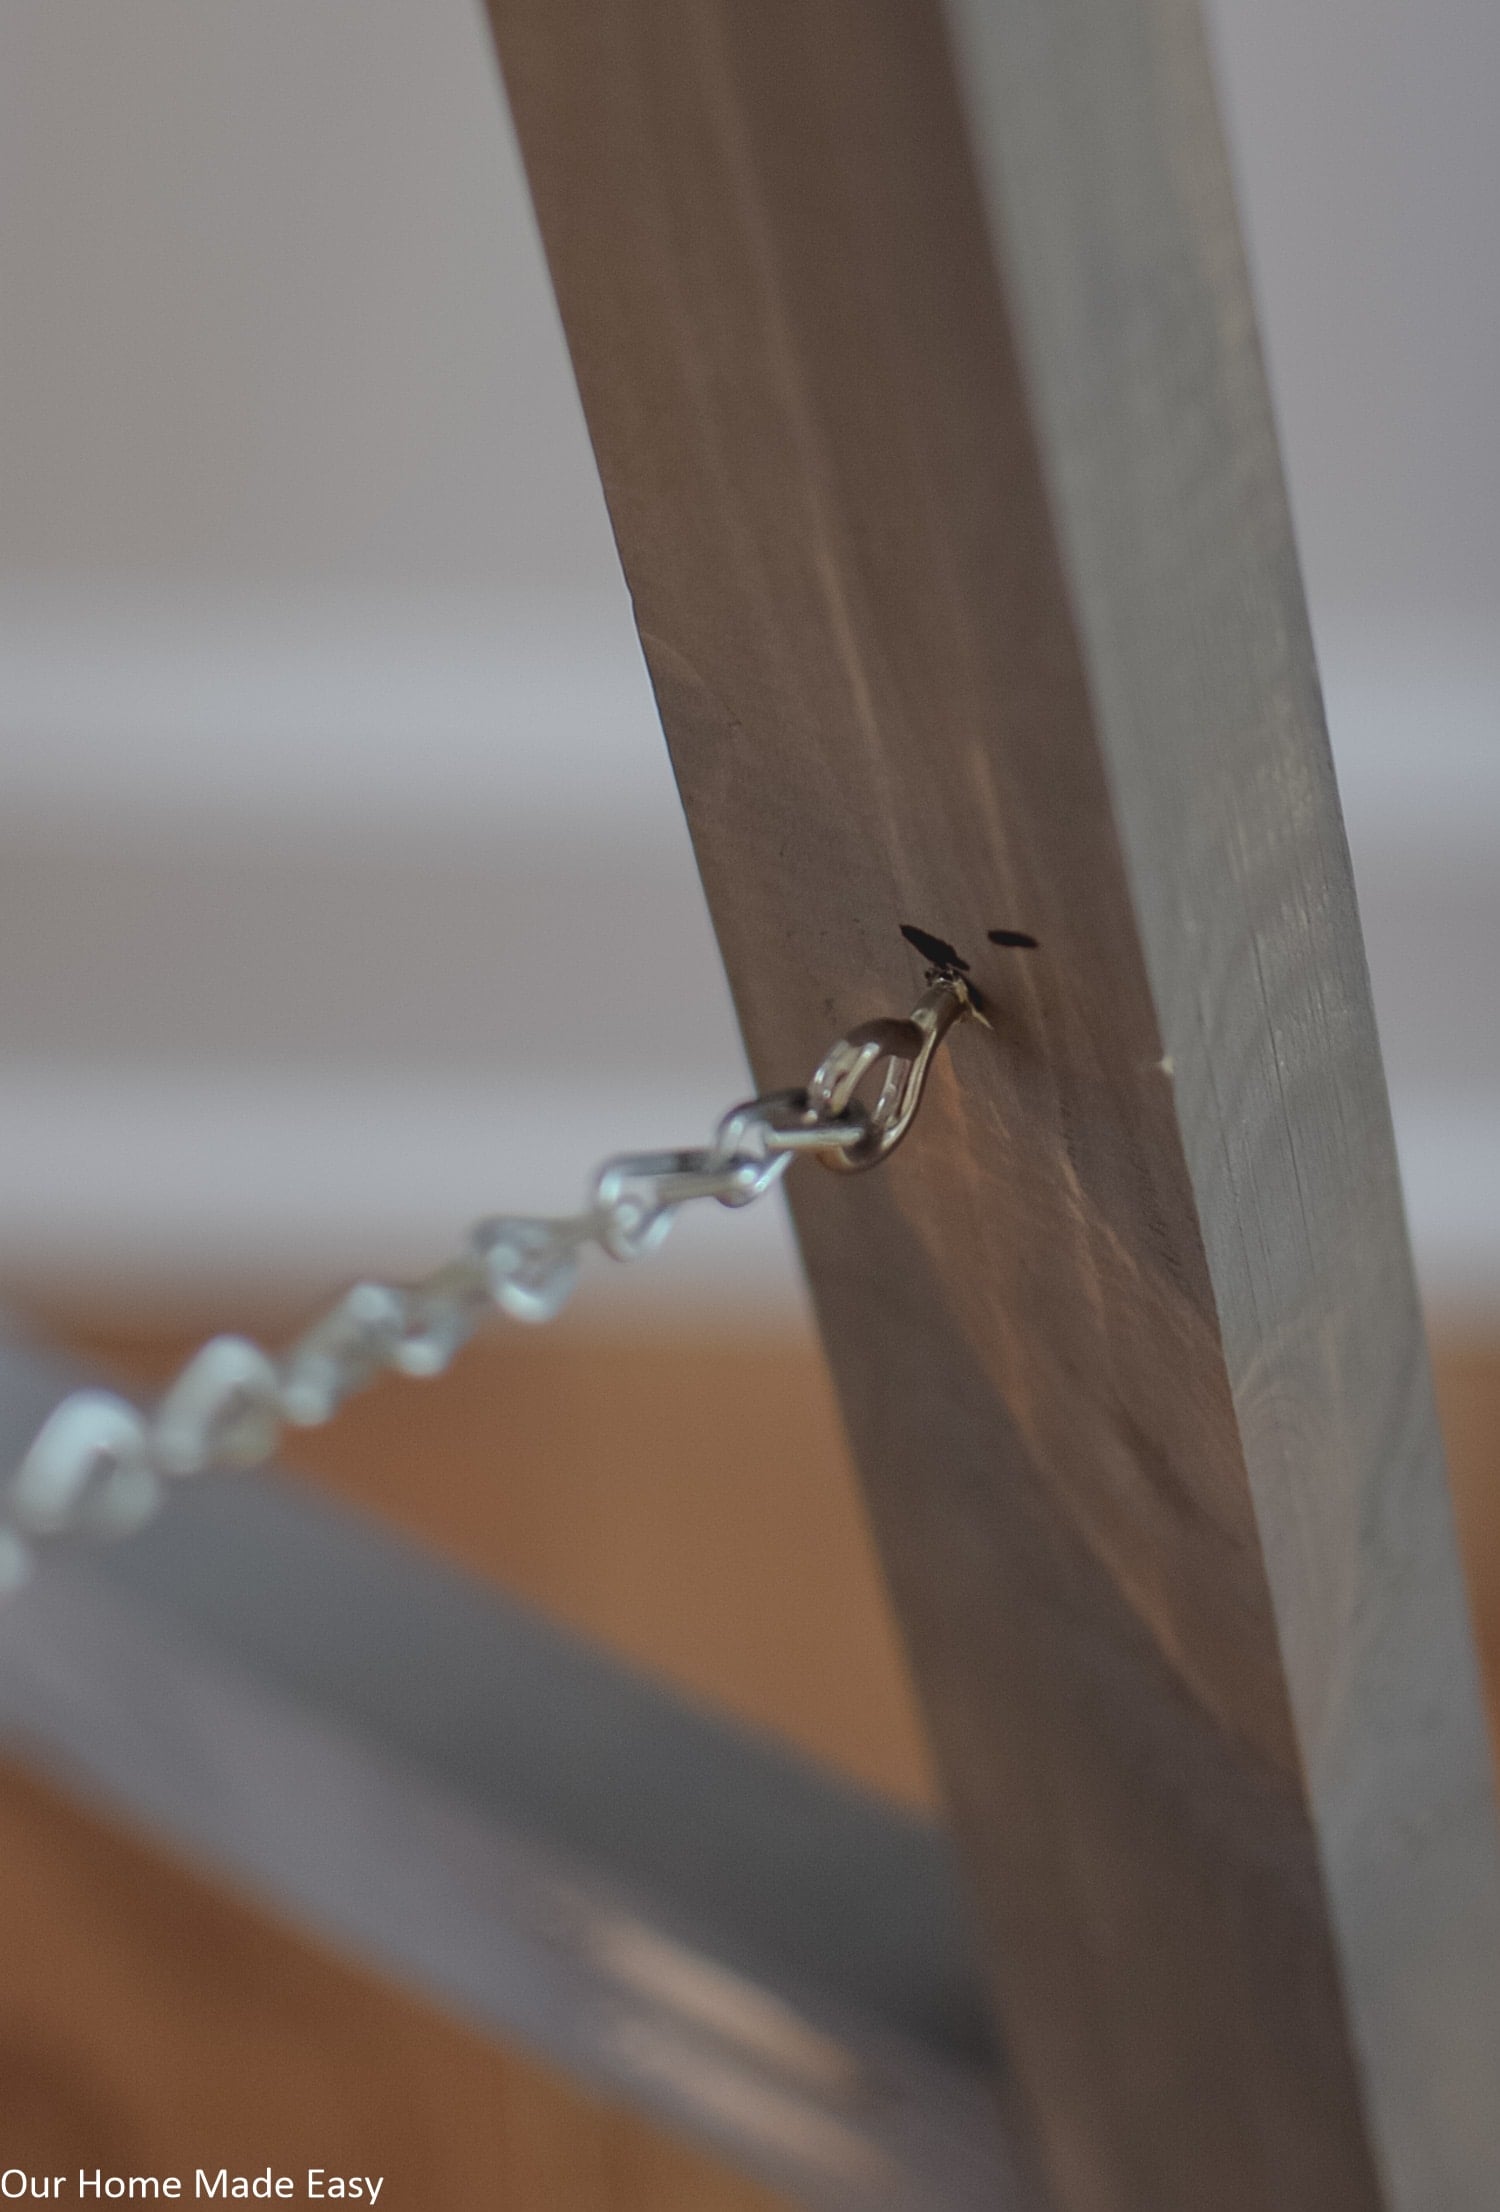 A close up look at the eye hooks and chains on the support legs of this DIY wooden Fall sign